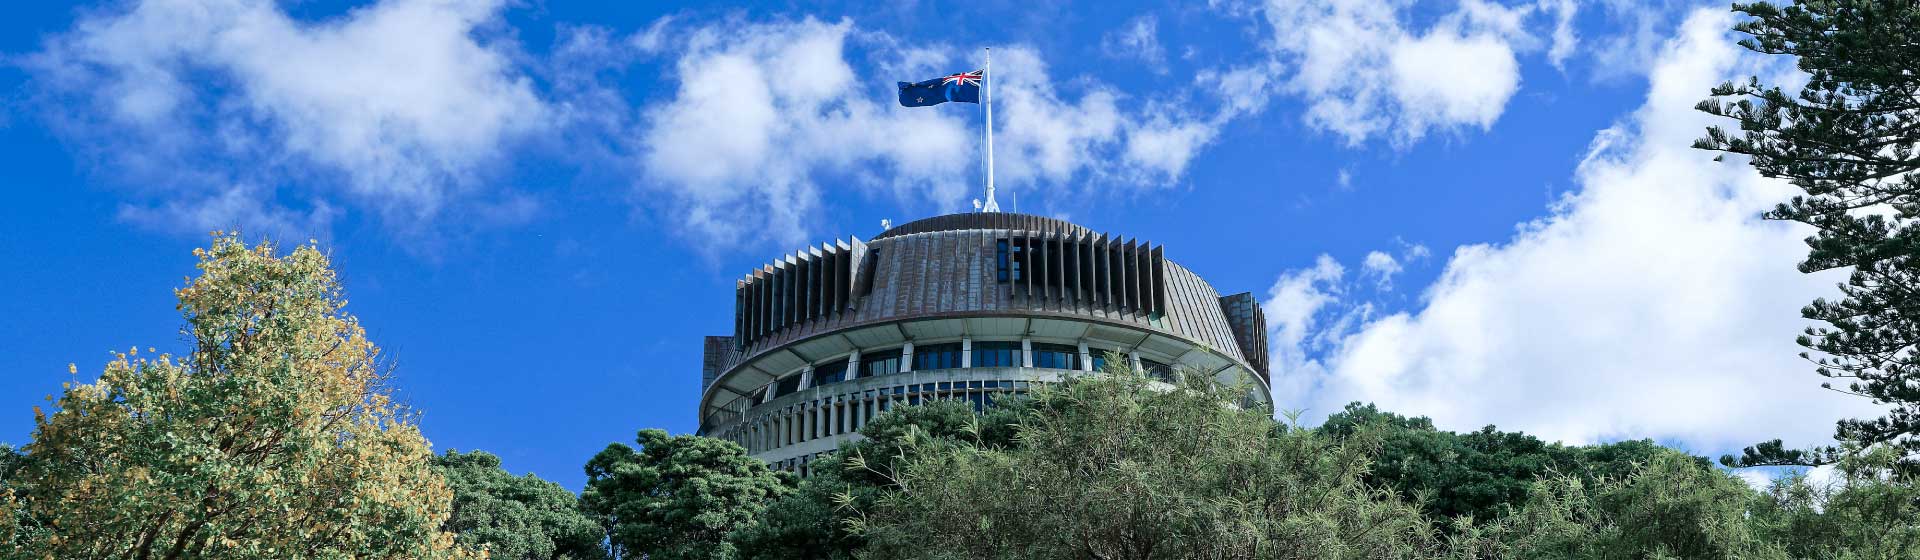 The New Zealand Parliament building in Wellington